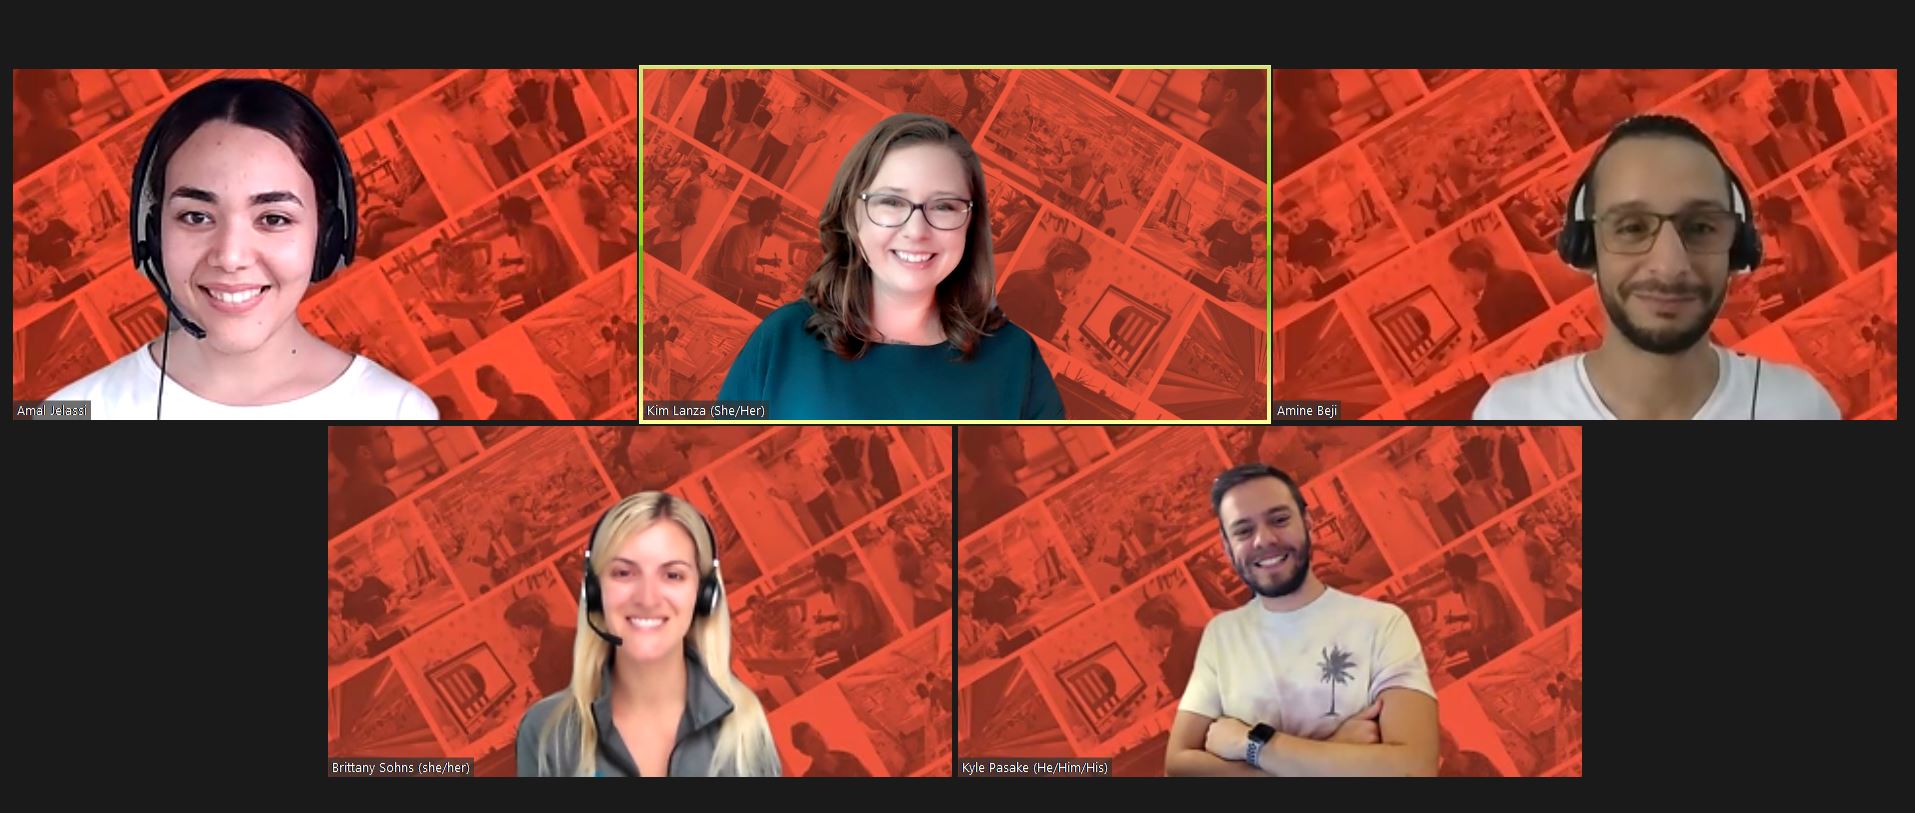 team members on a zoom call with company logo background